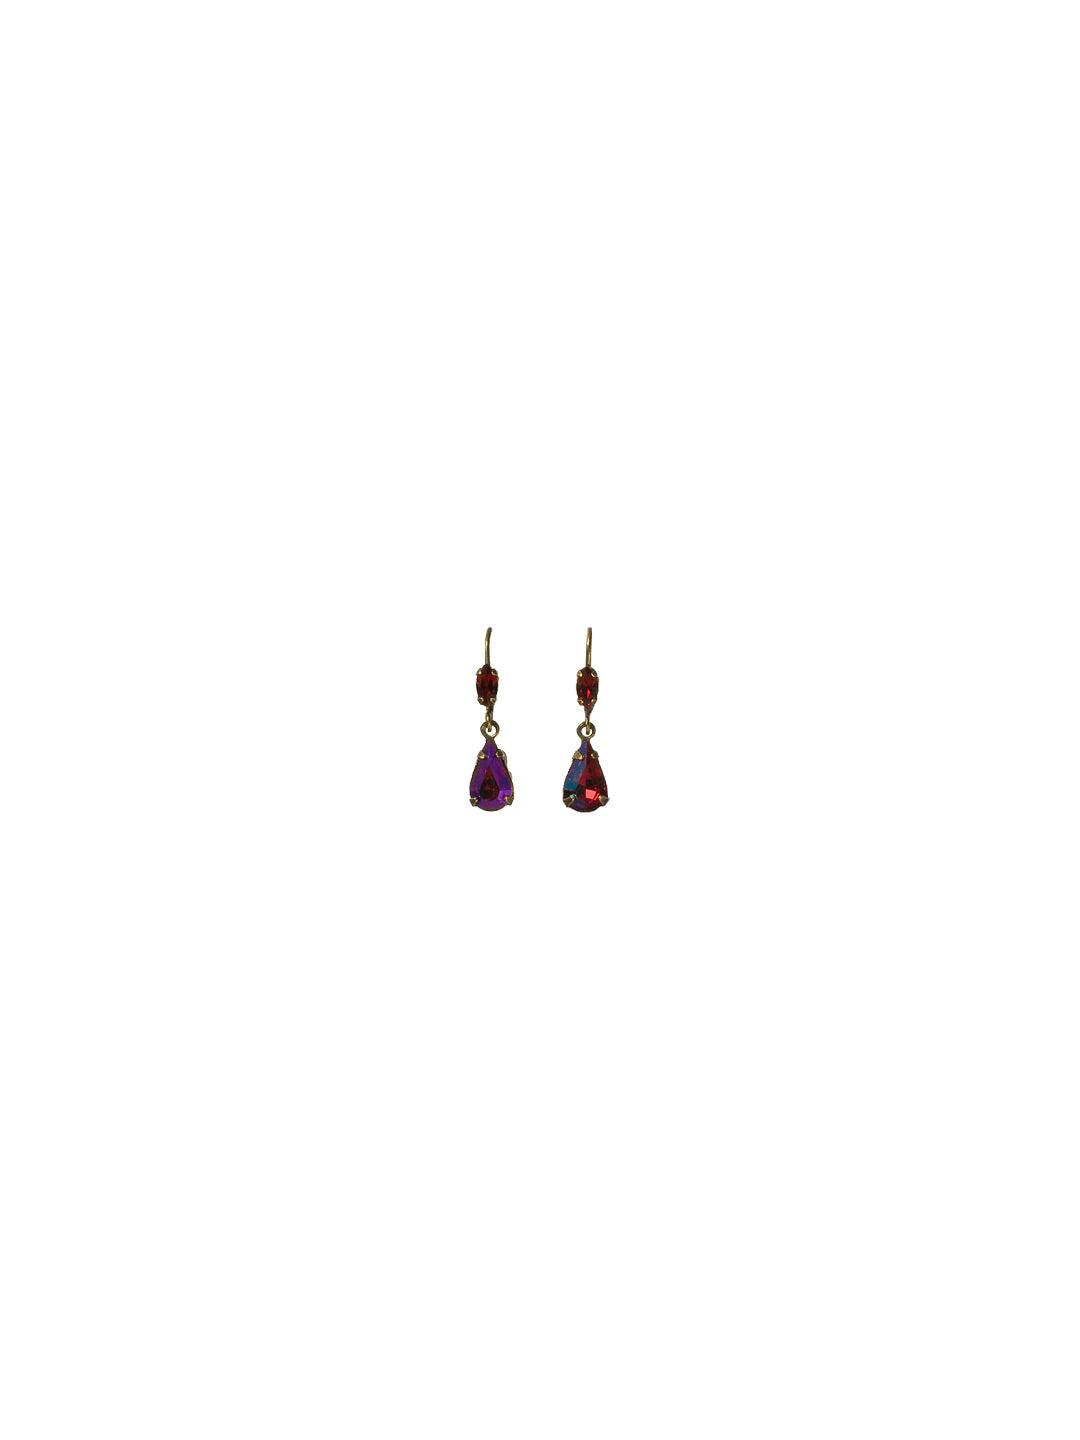 Teardrop Dangle Earrings - EBF20AGCB - Pair with anything! Antique links connect these faceted crystals to form a delicate frame. The pear shape creates a classic yet distinctive silhouette. From Sorrelli's Cranberry collection in our Antique Gold-tone finish.